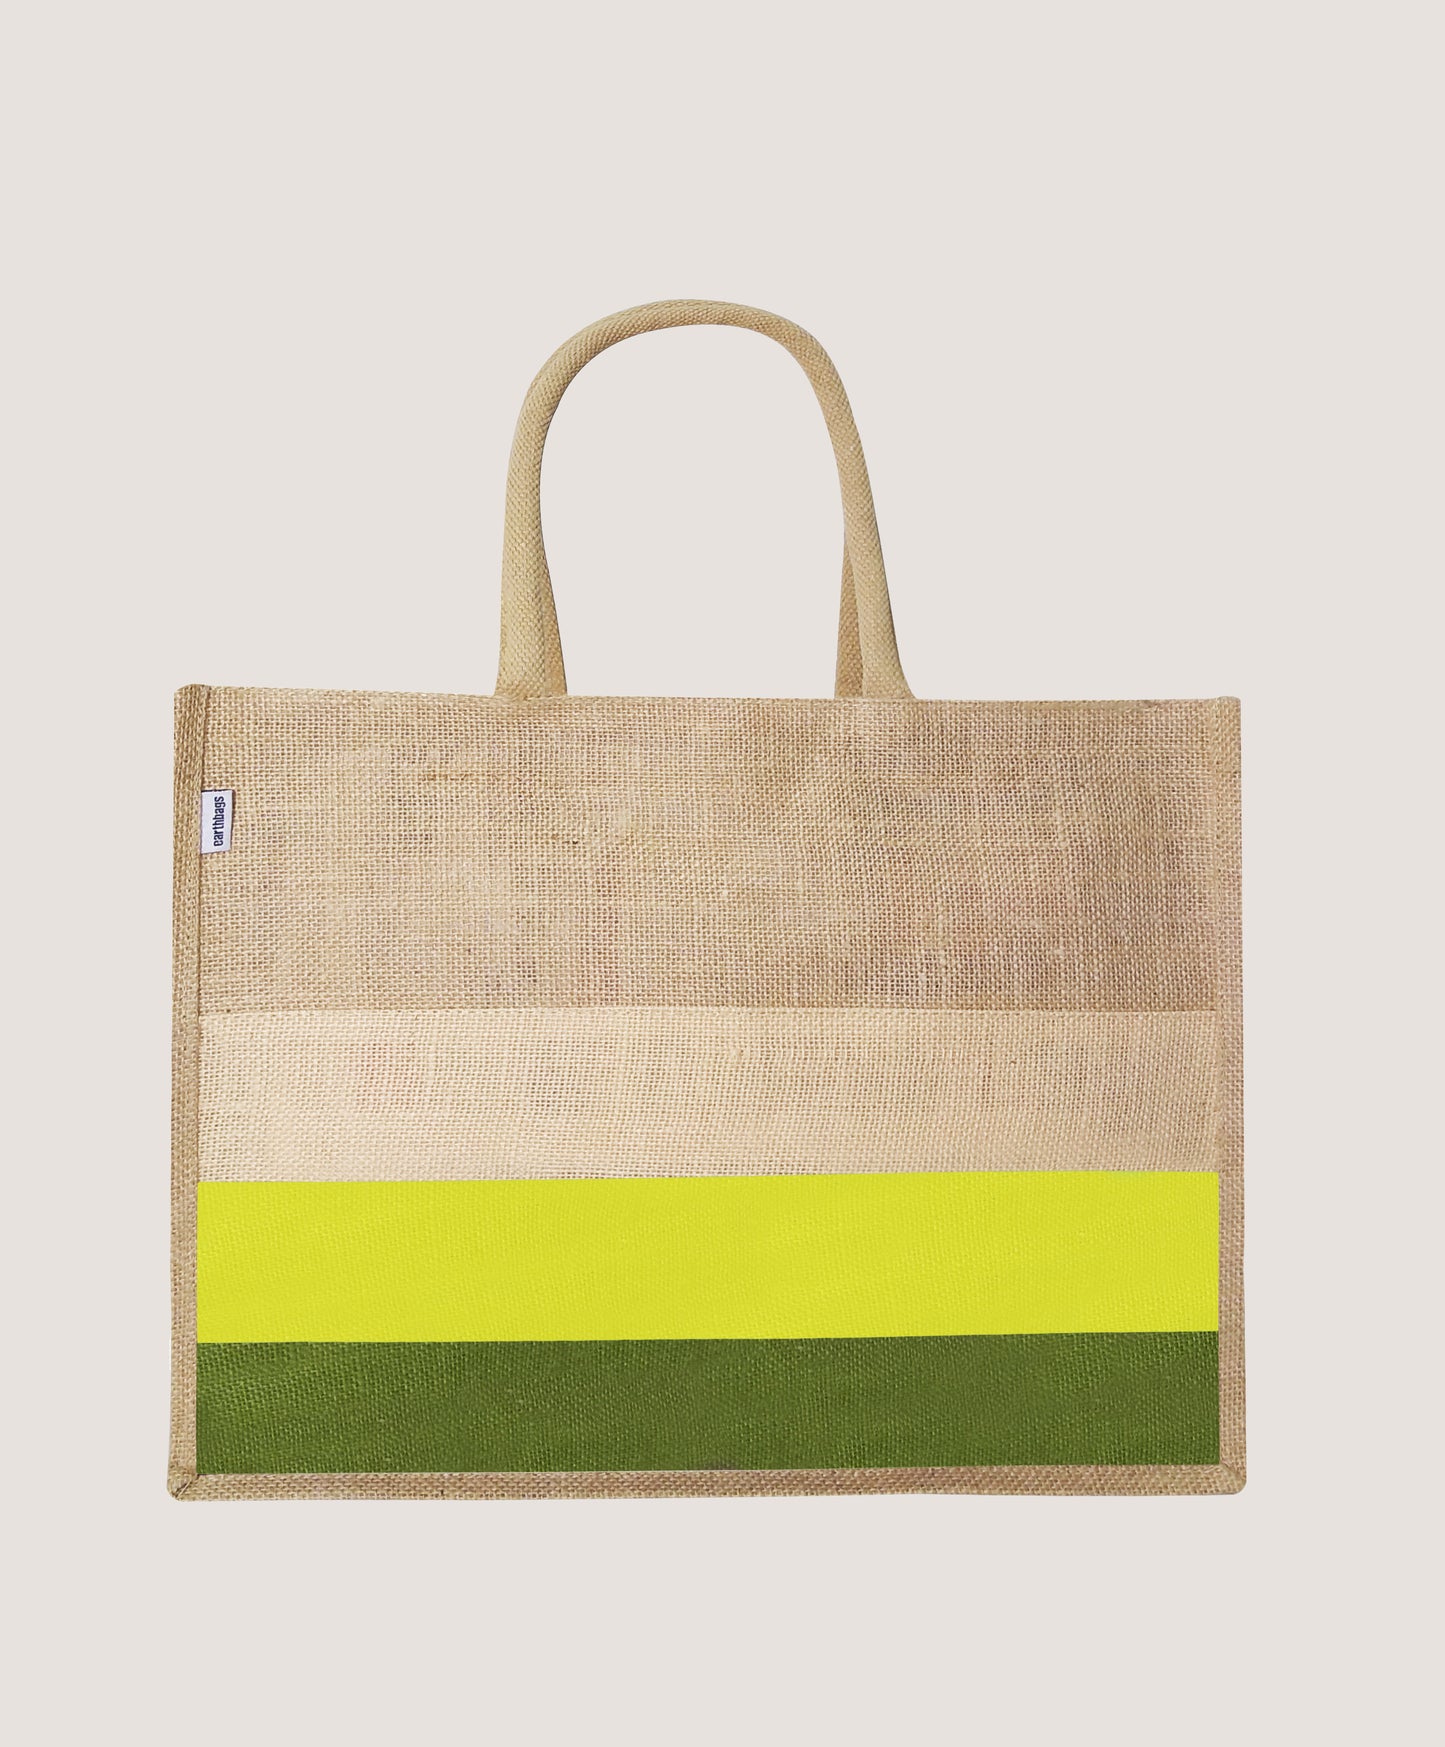 EARTHBAGS LINER SHOPPER IN MULTICOLOR WITH ZIPPER